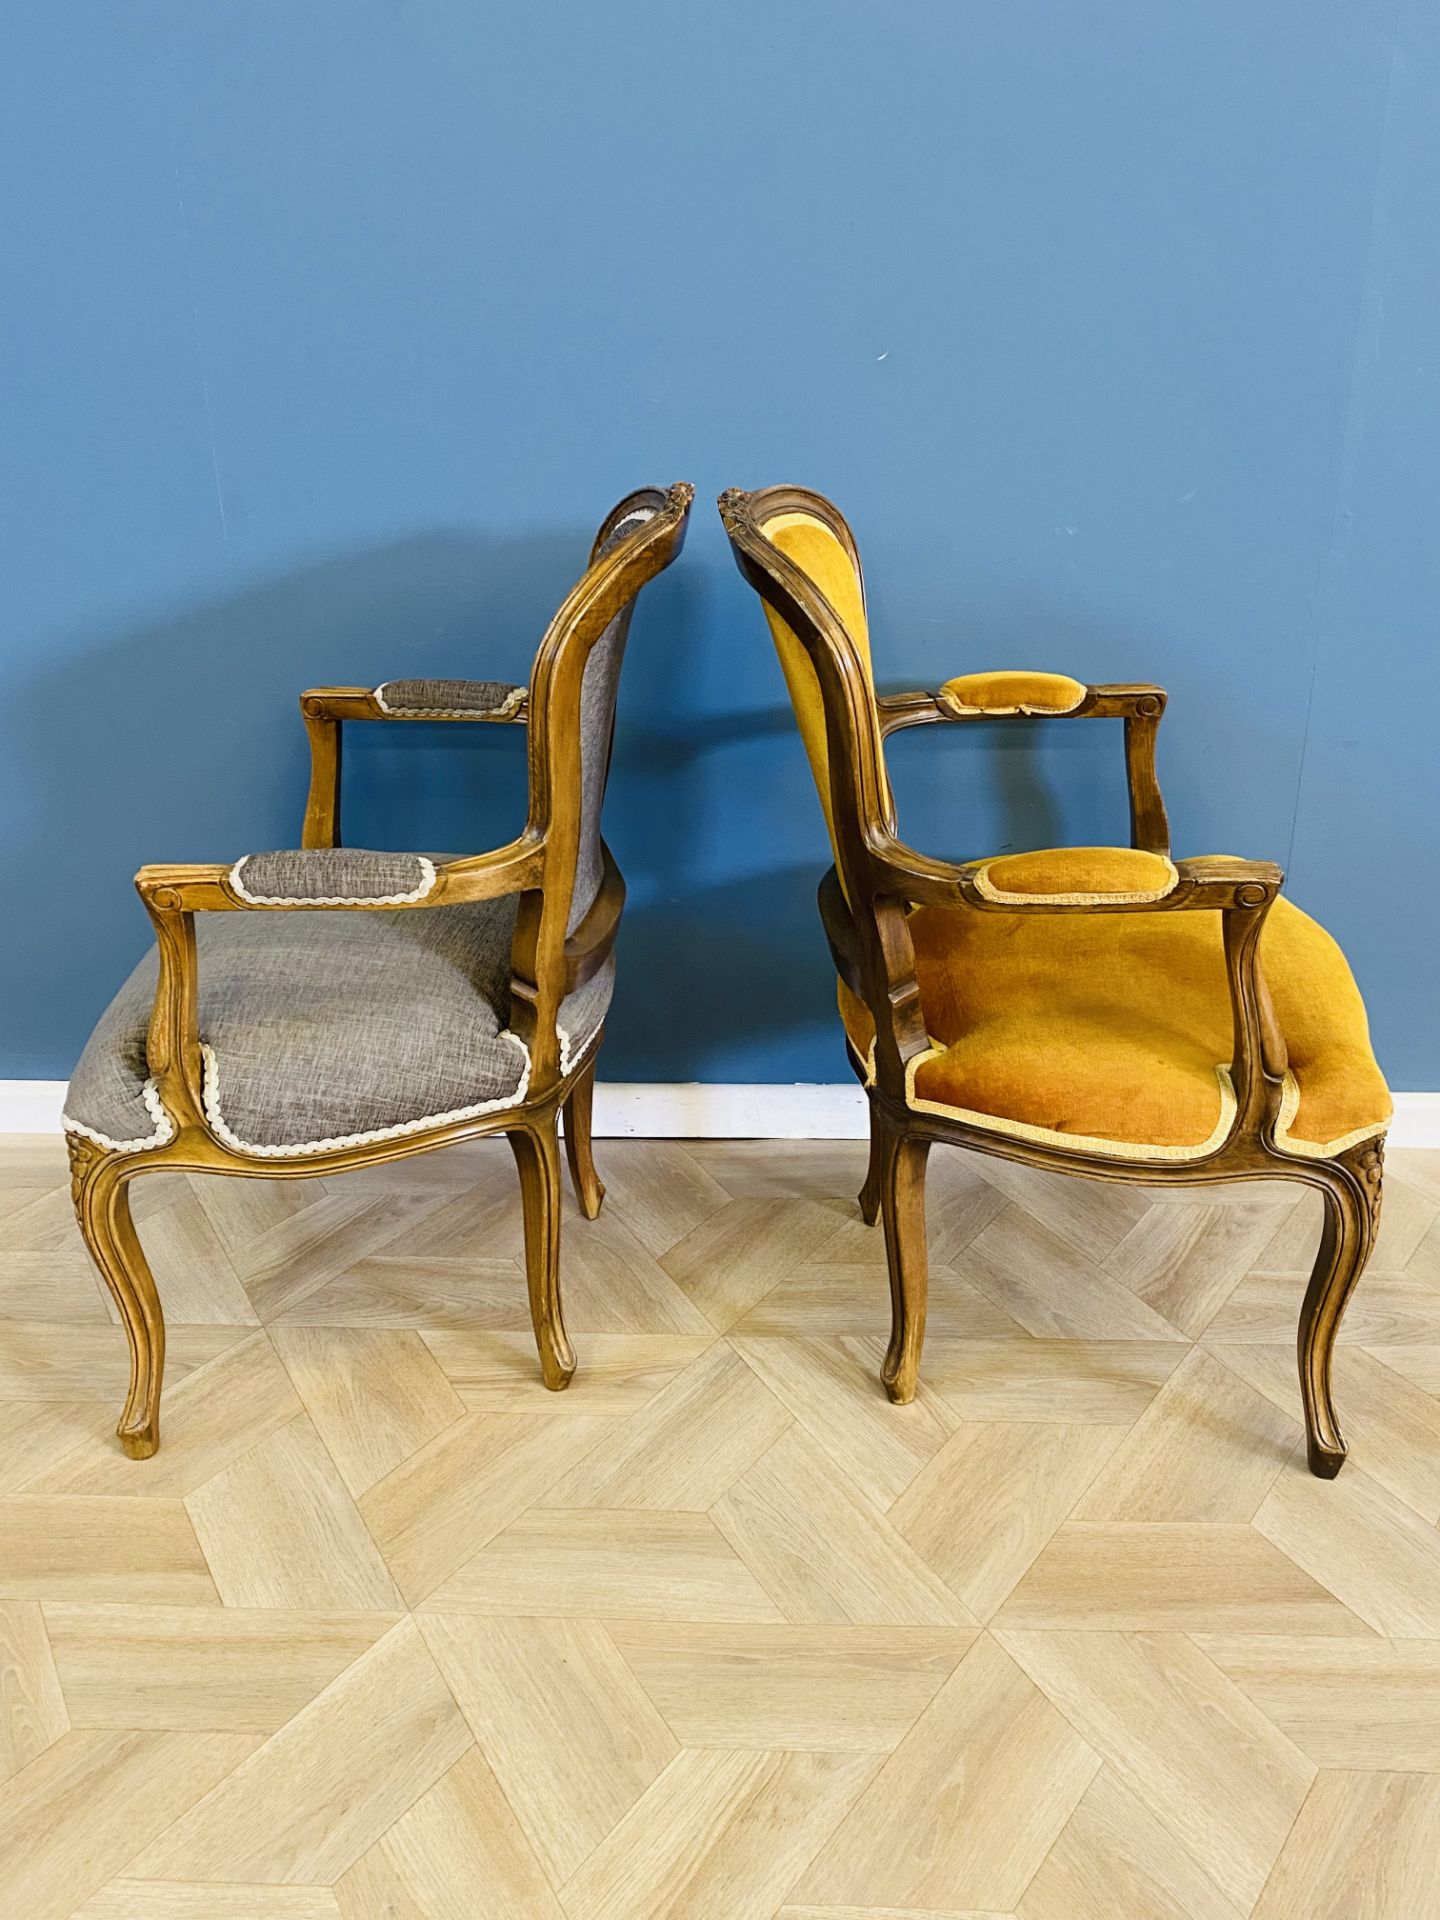 Pair of French style elbow chairs - Image 4 of 8